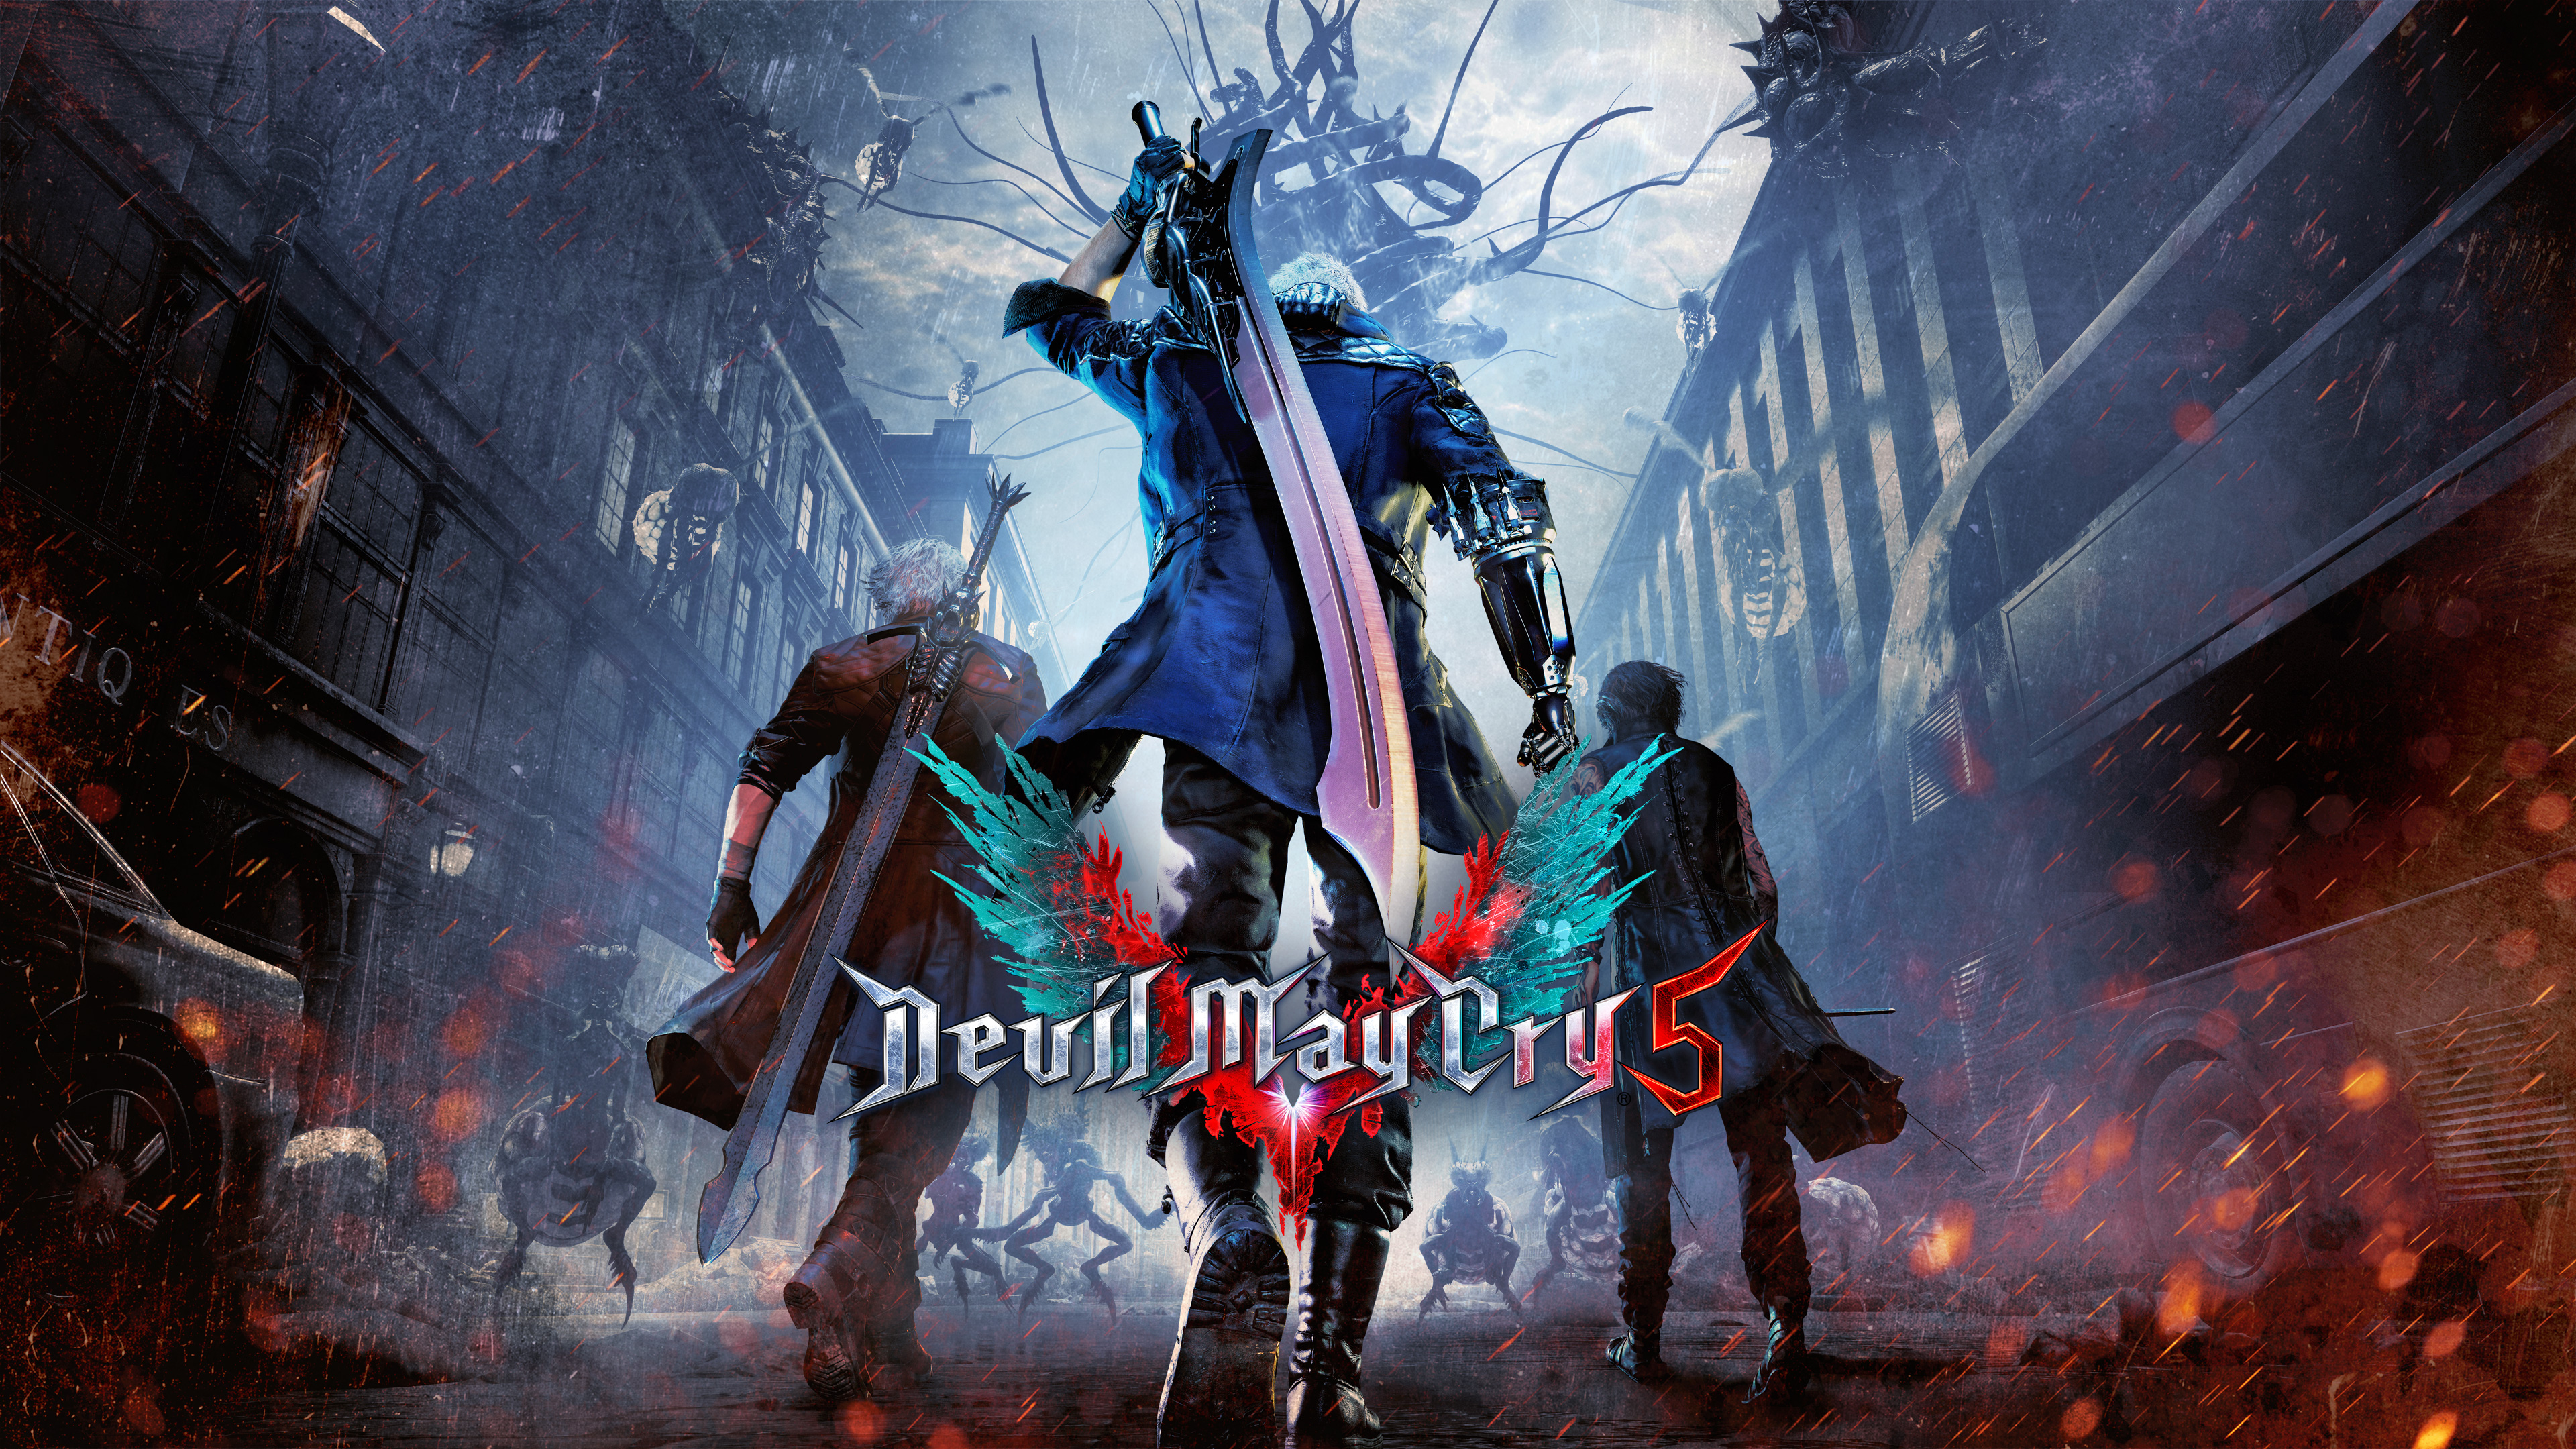 Devil May Cry 4 PS3  Buy or Rent CD at Best Price